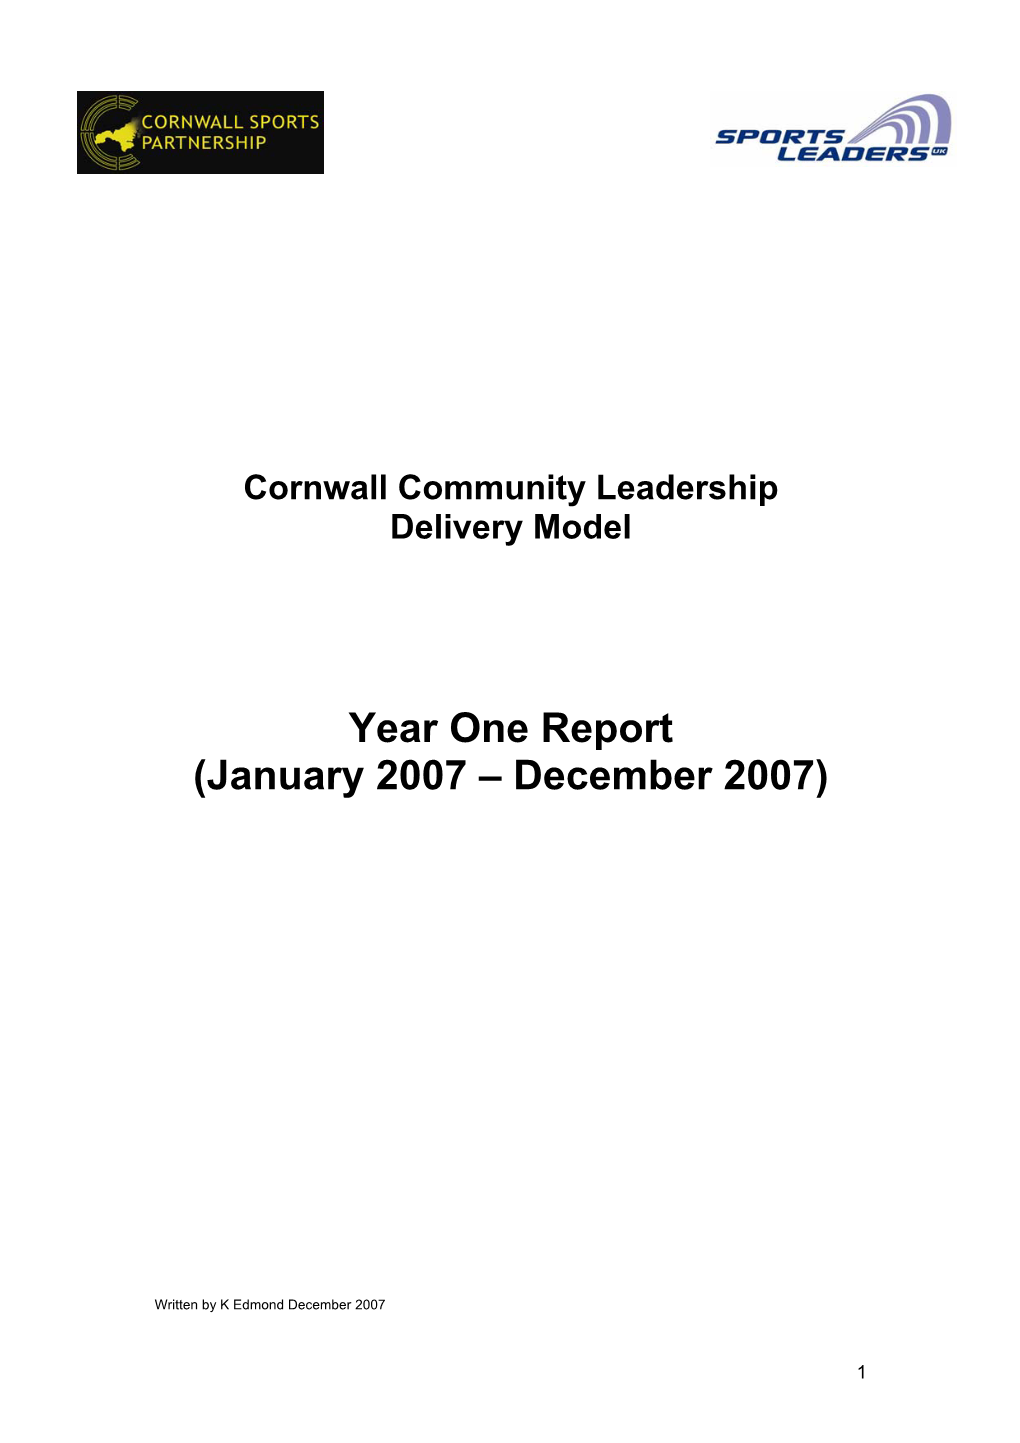 Interim 6 Monthly Report for the Cornwall Community Leadership Delivery Model